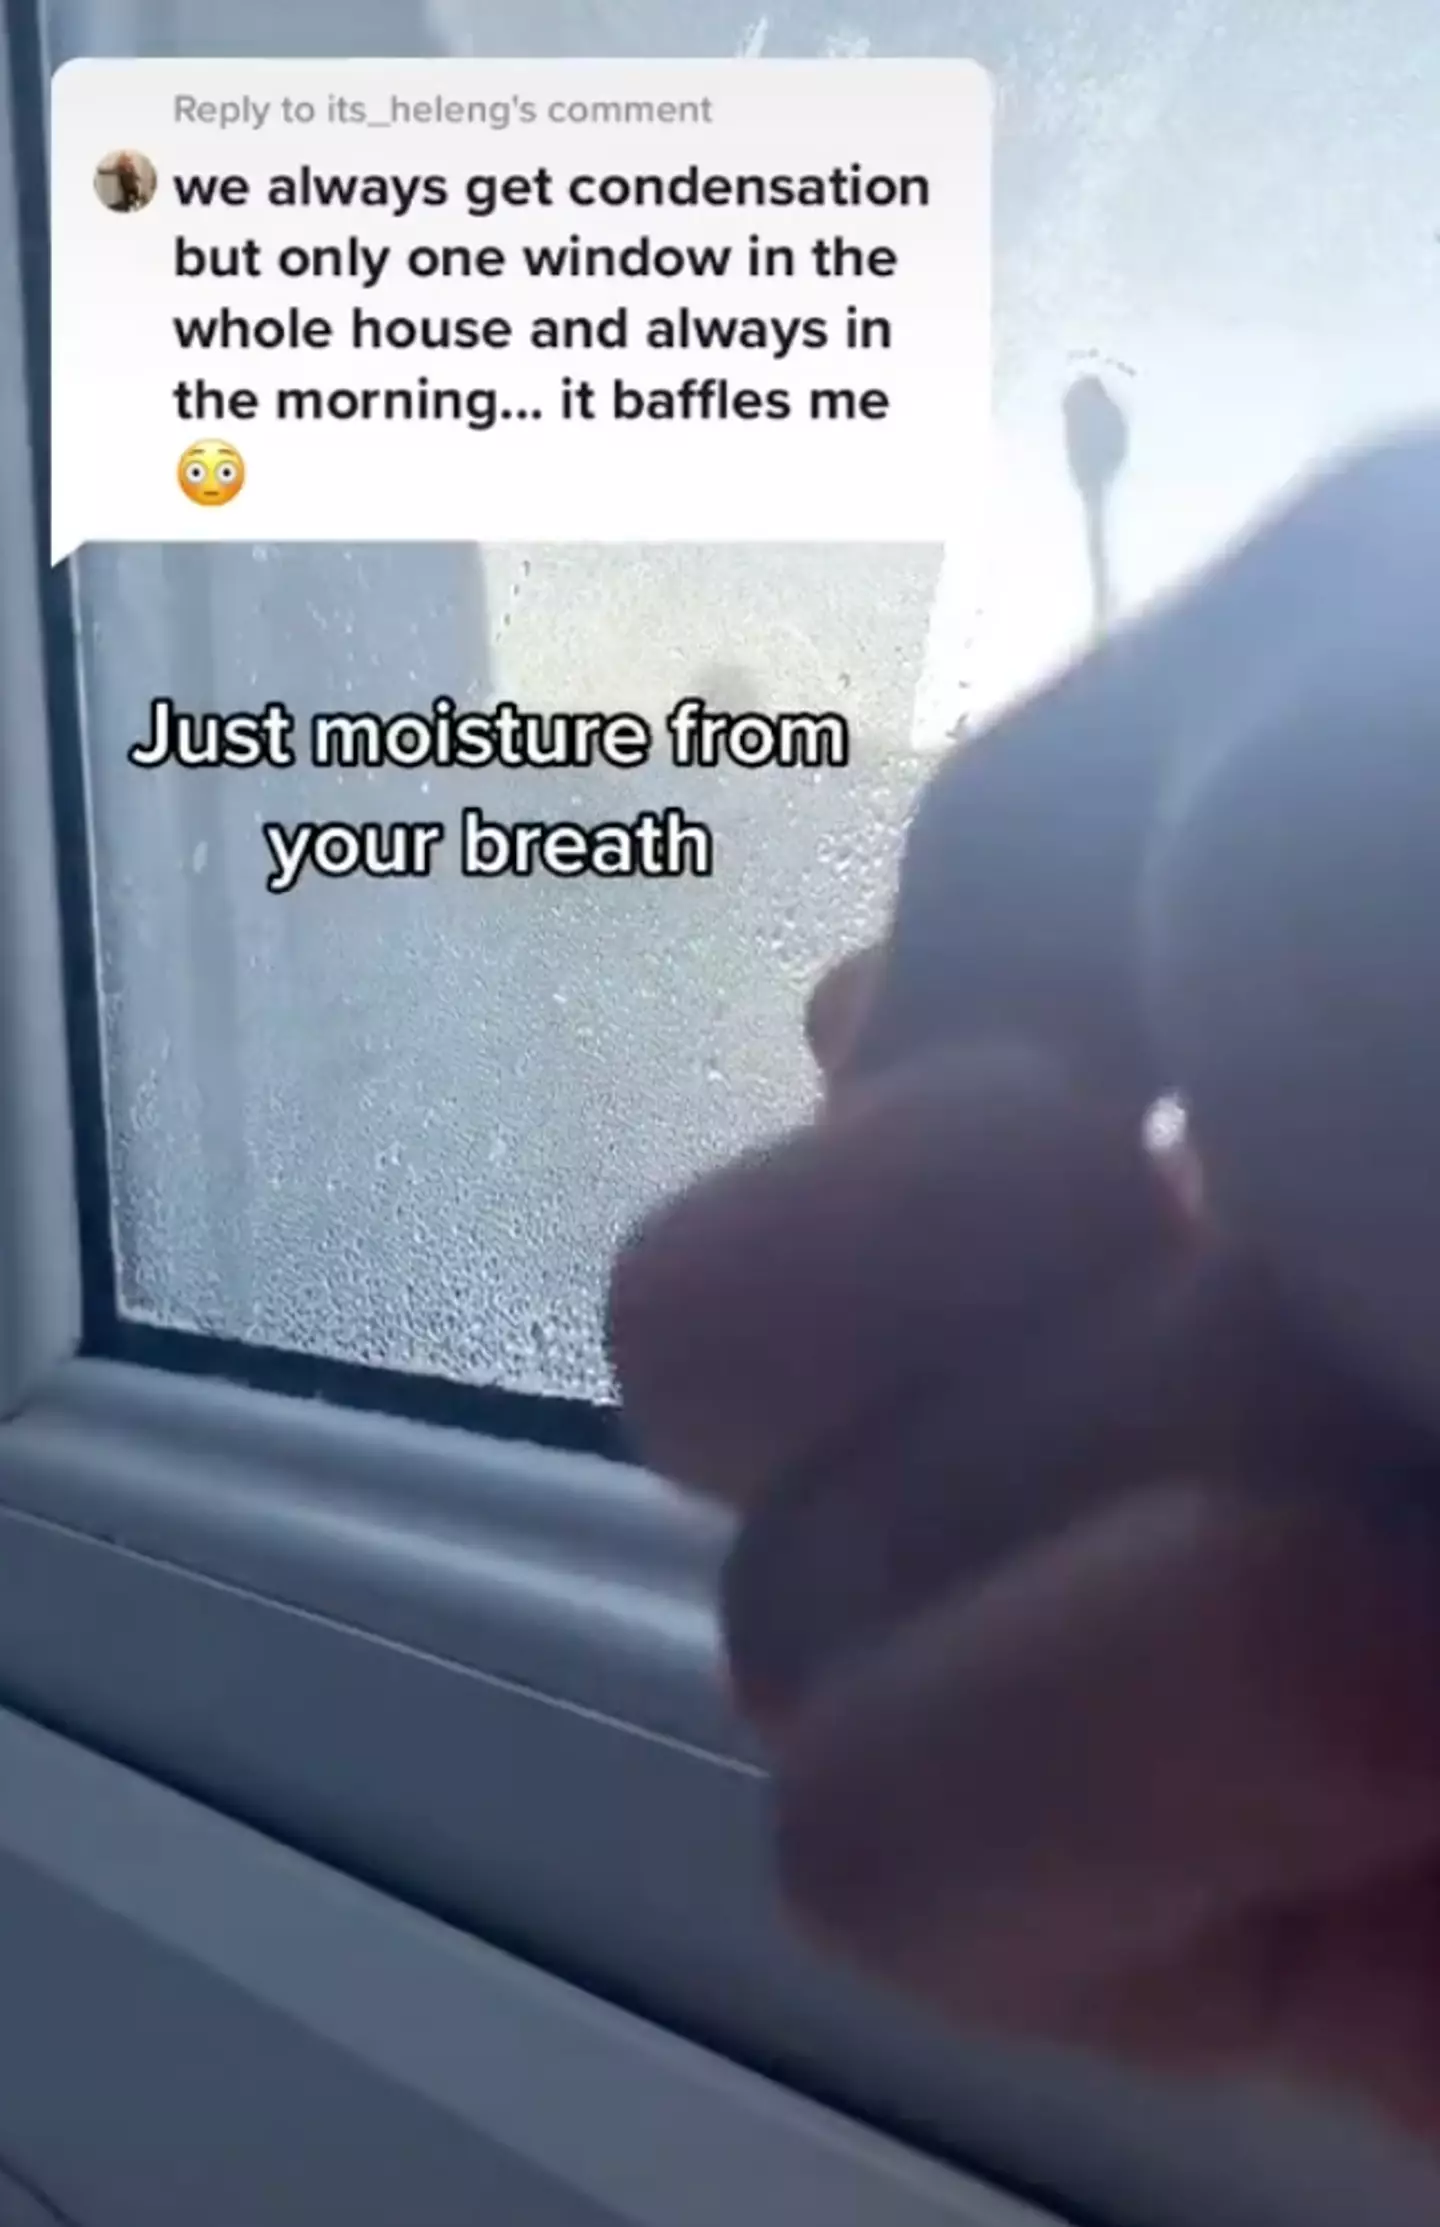 The condensation is caused by moisture from your breath.